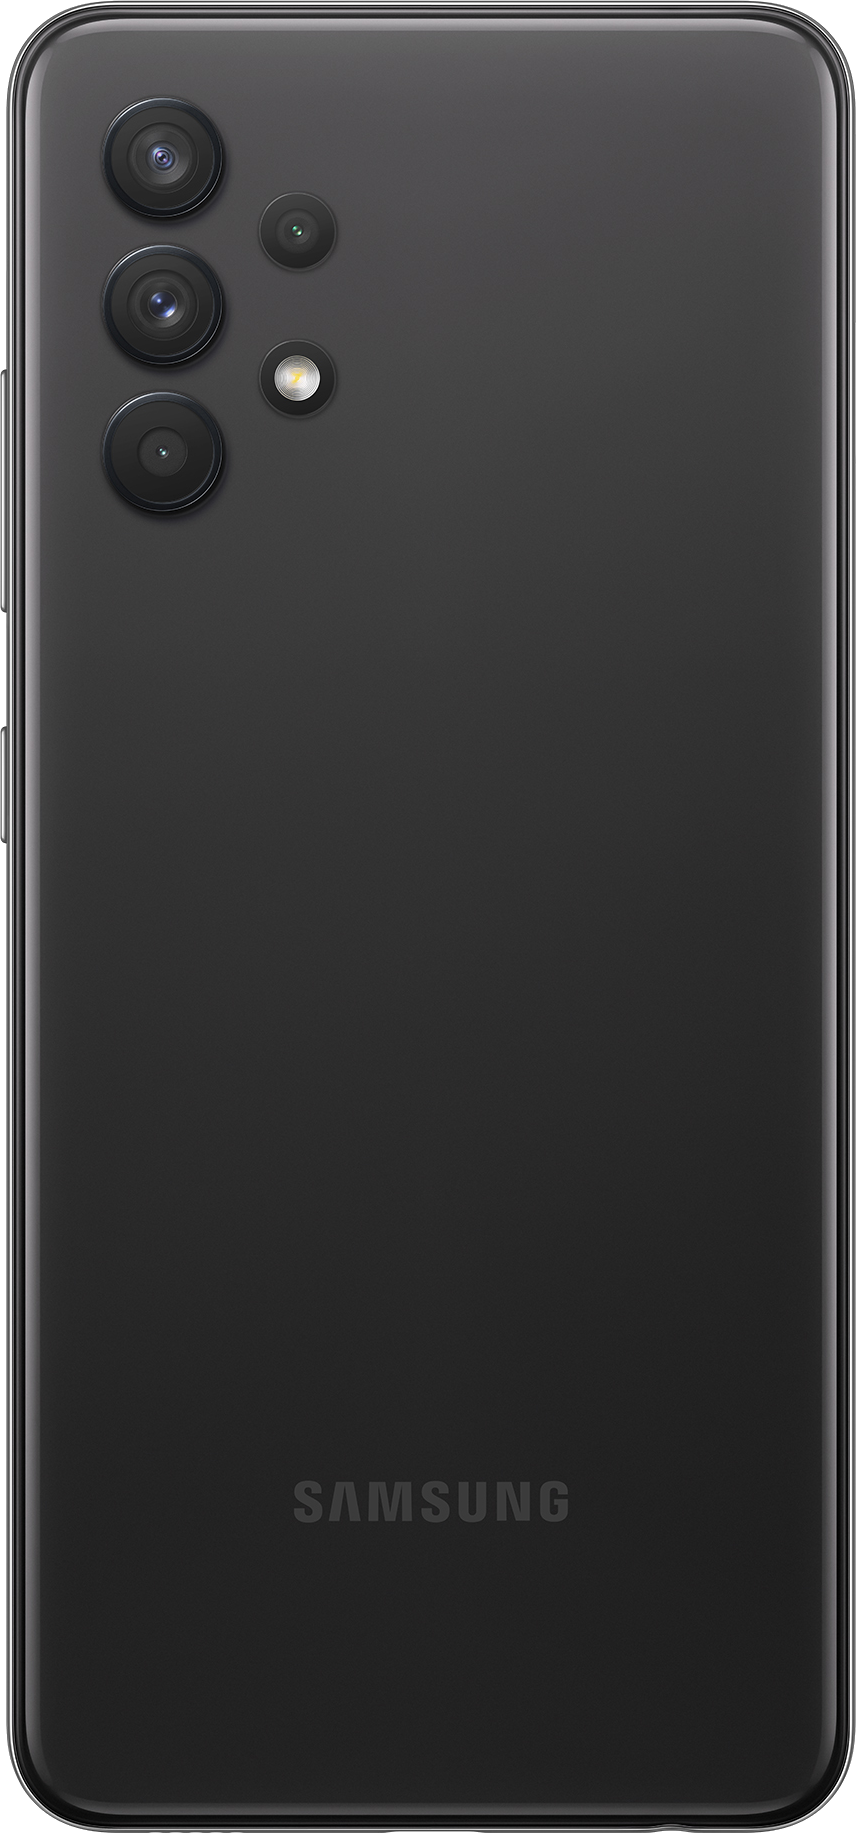 Rear view of A32 Plus phone